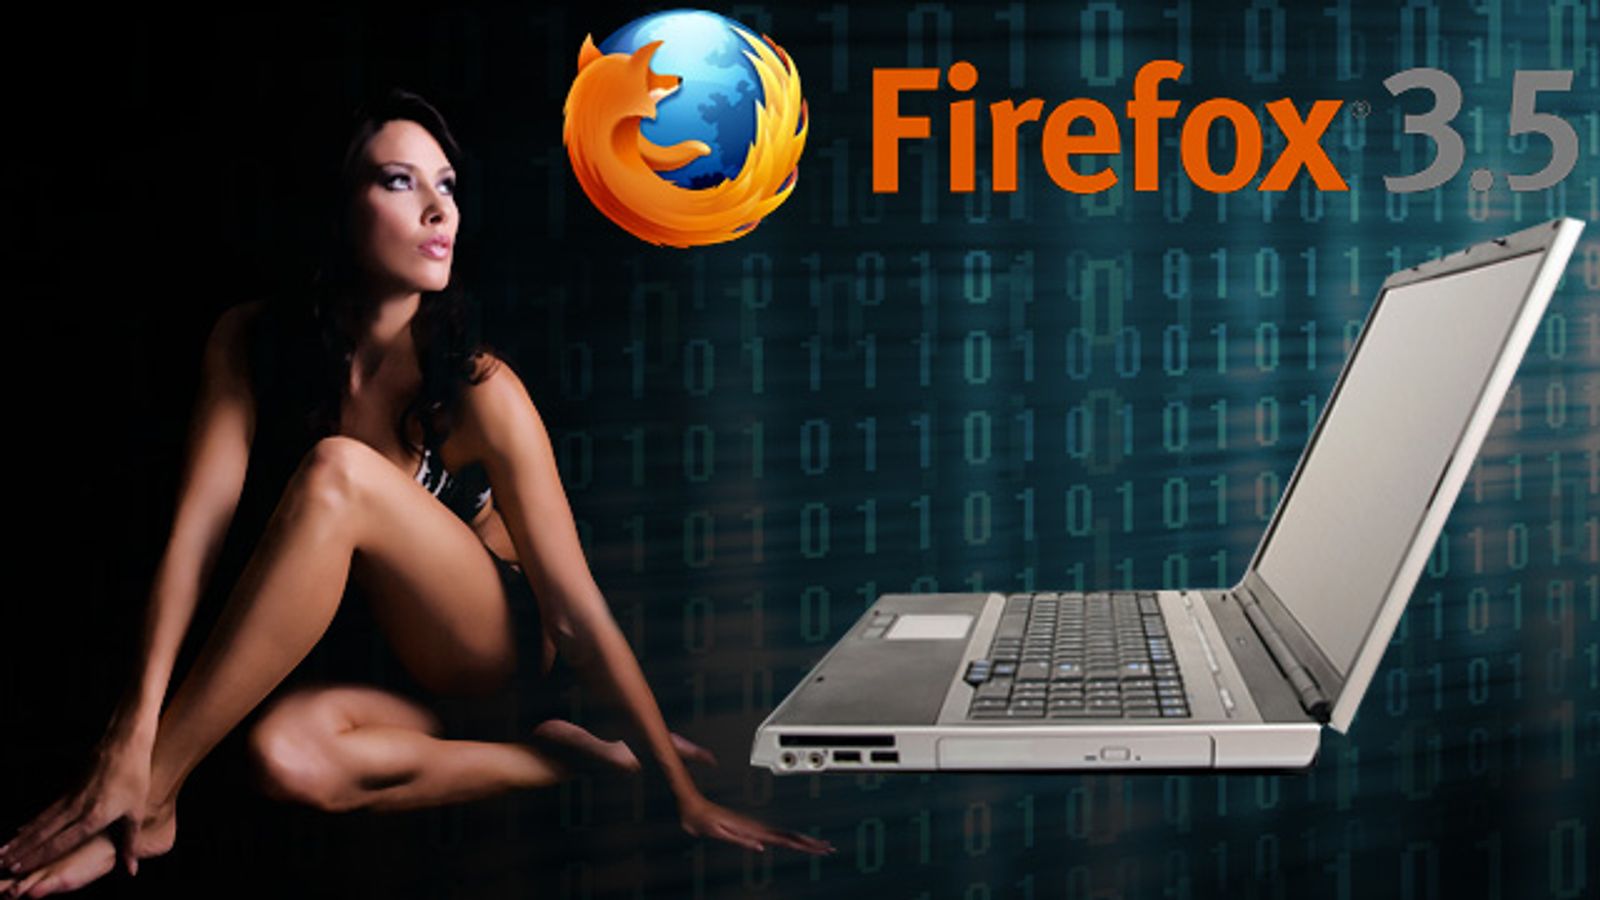 Was Porn Shame Behind the Rejection of Firefox 3?